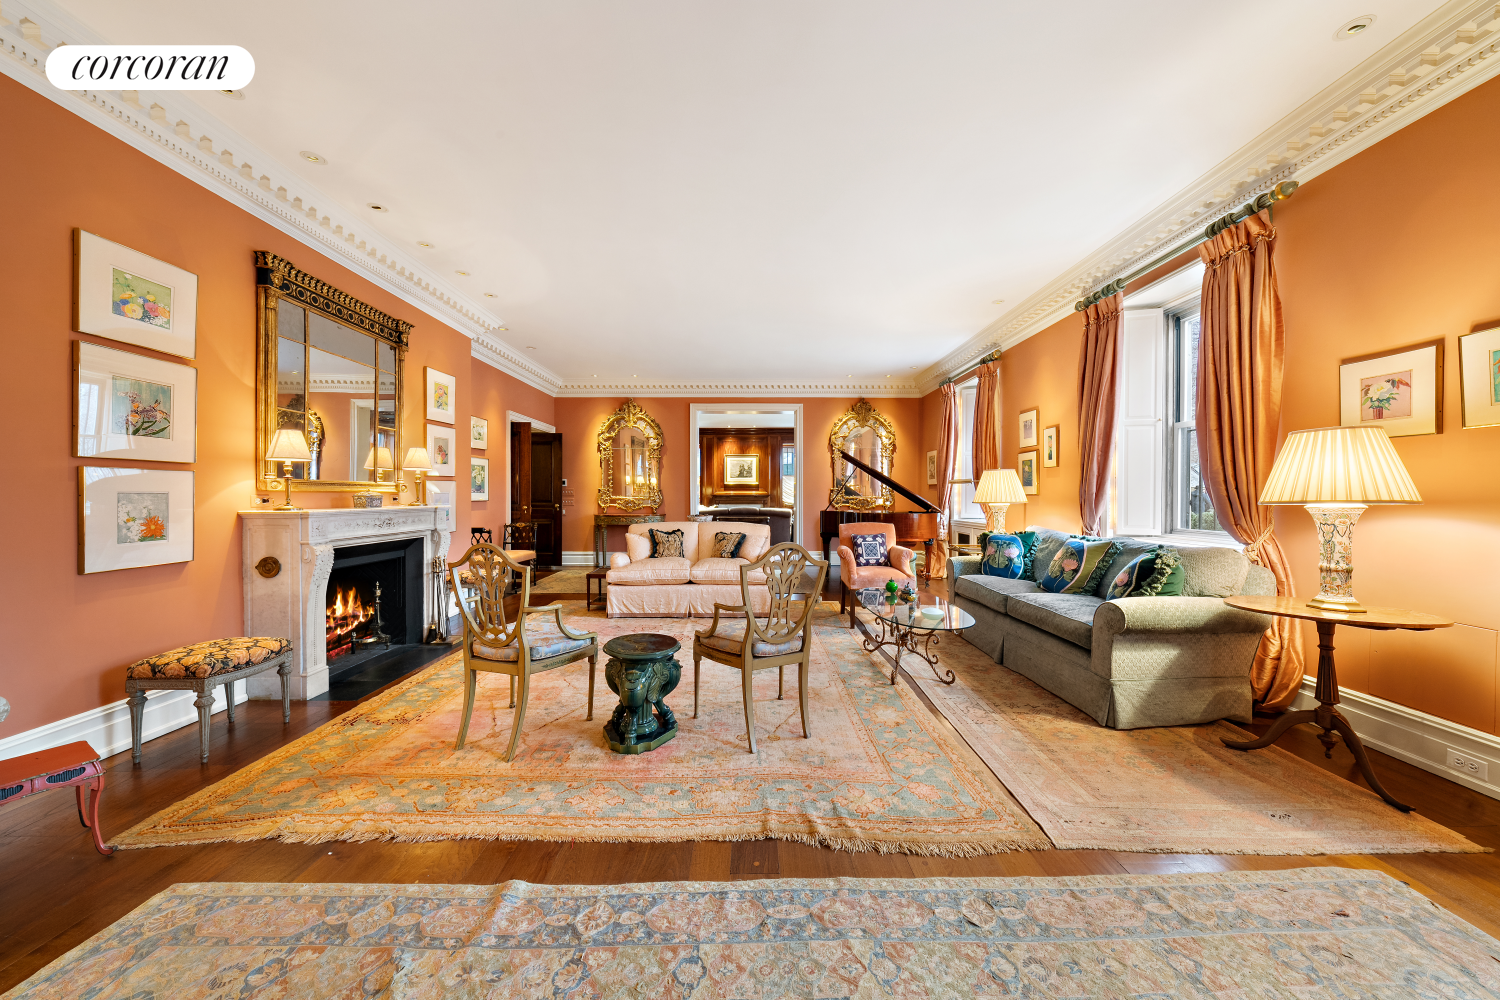 834 5th Avenue Mais/A, Lenox Hill, Upper East Side, NYC - 3 Bedrooms  
2.5 Bathrooms  
11 Rooms - 